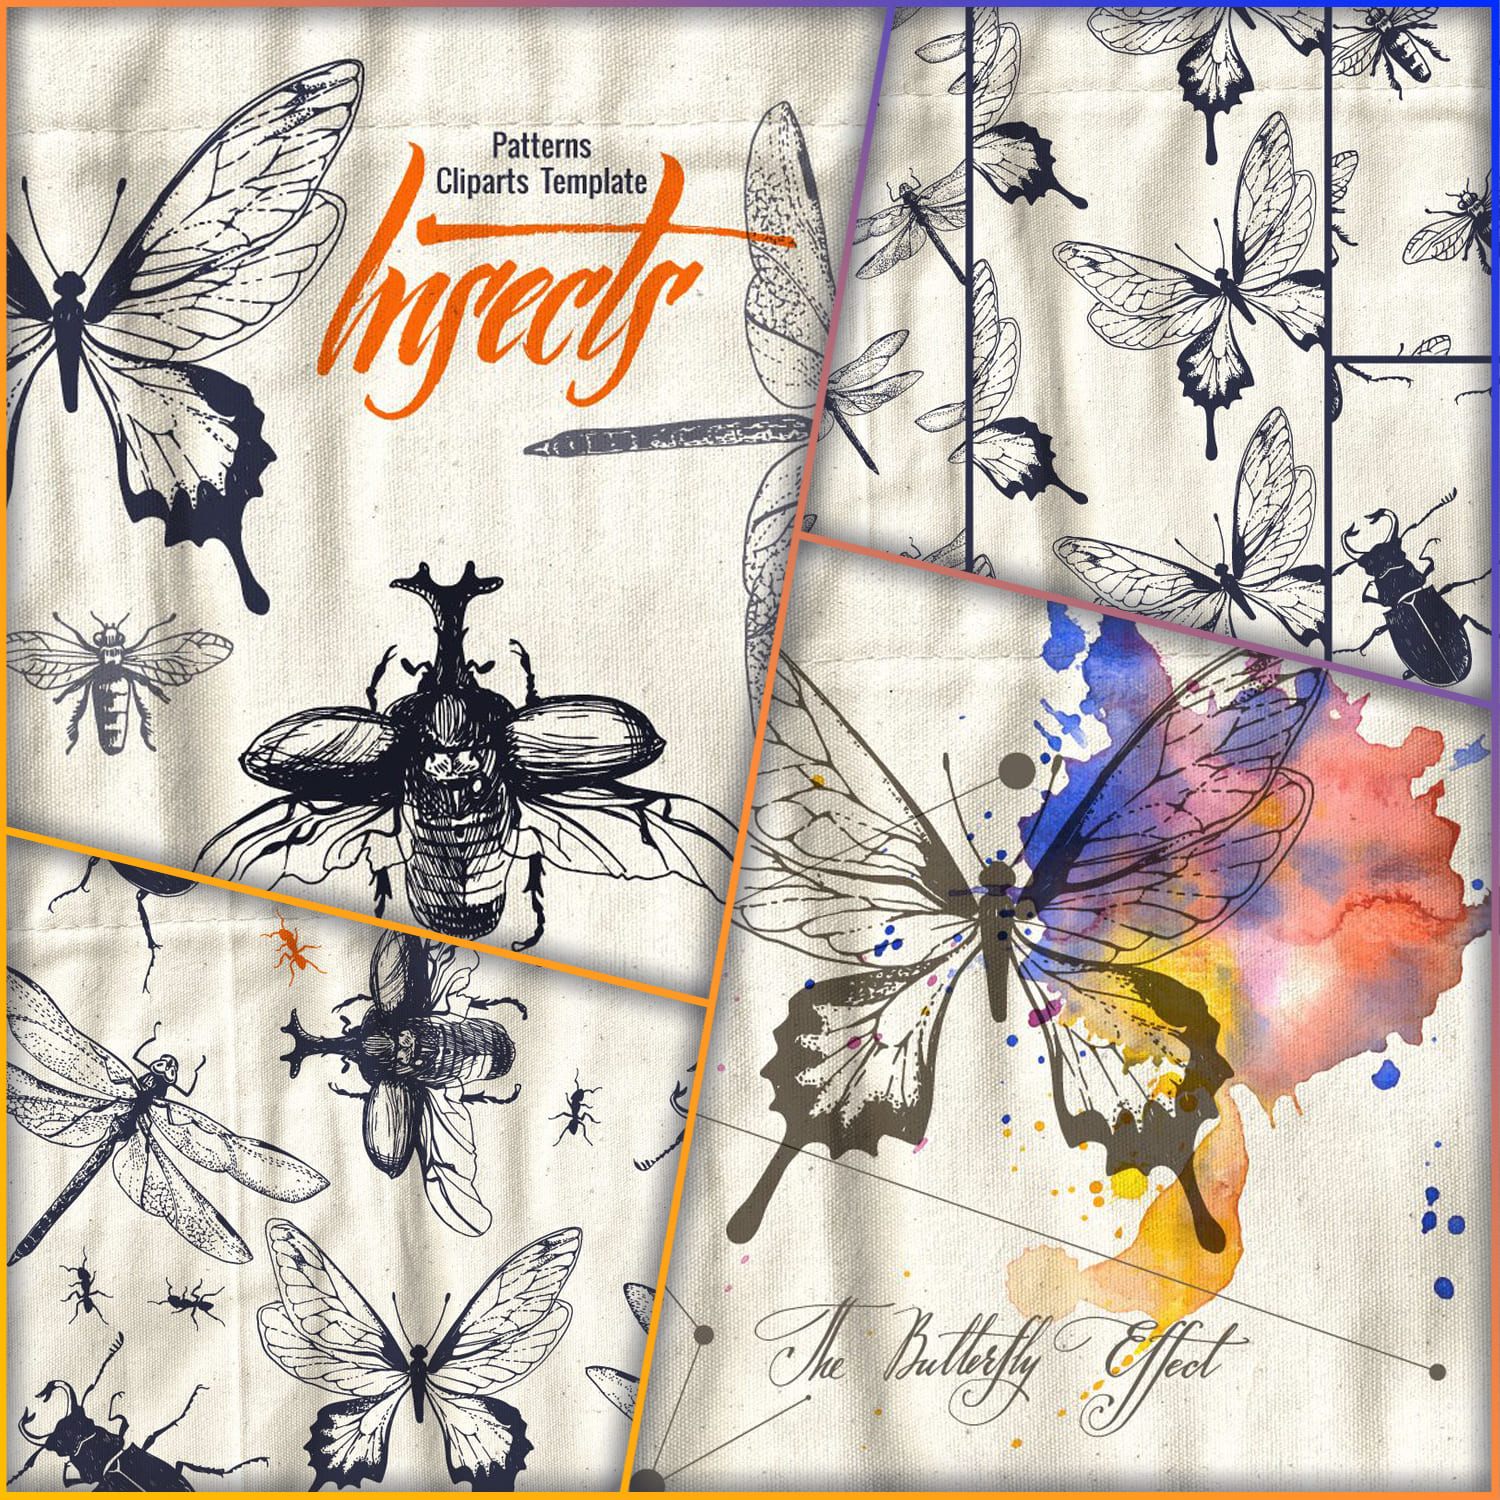 Insects in patterns and cliparts cover.